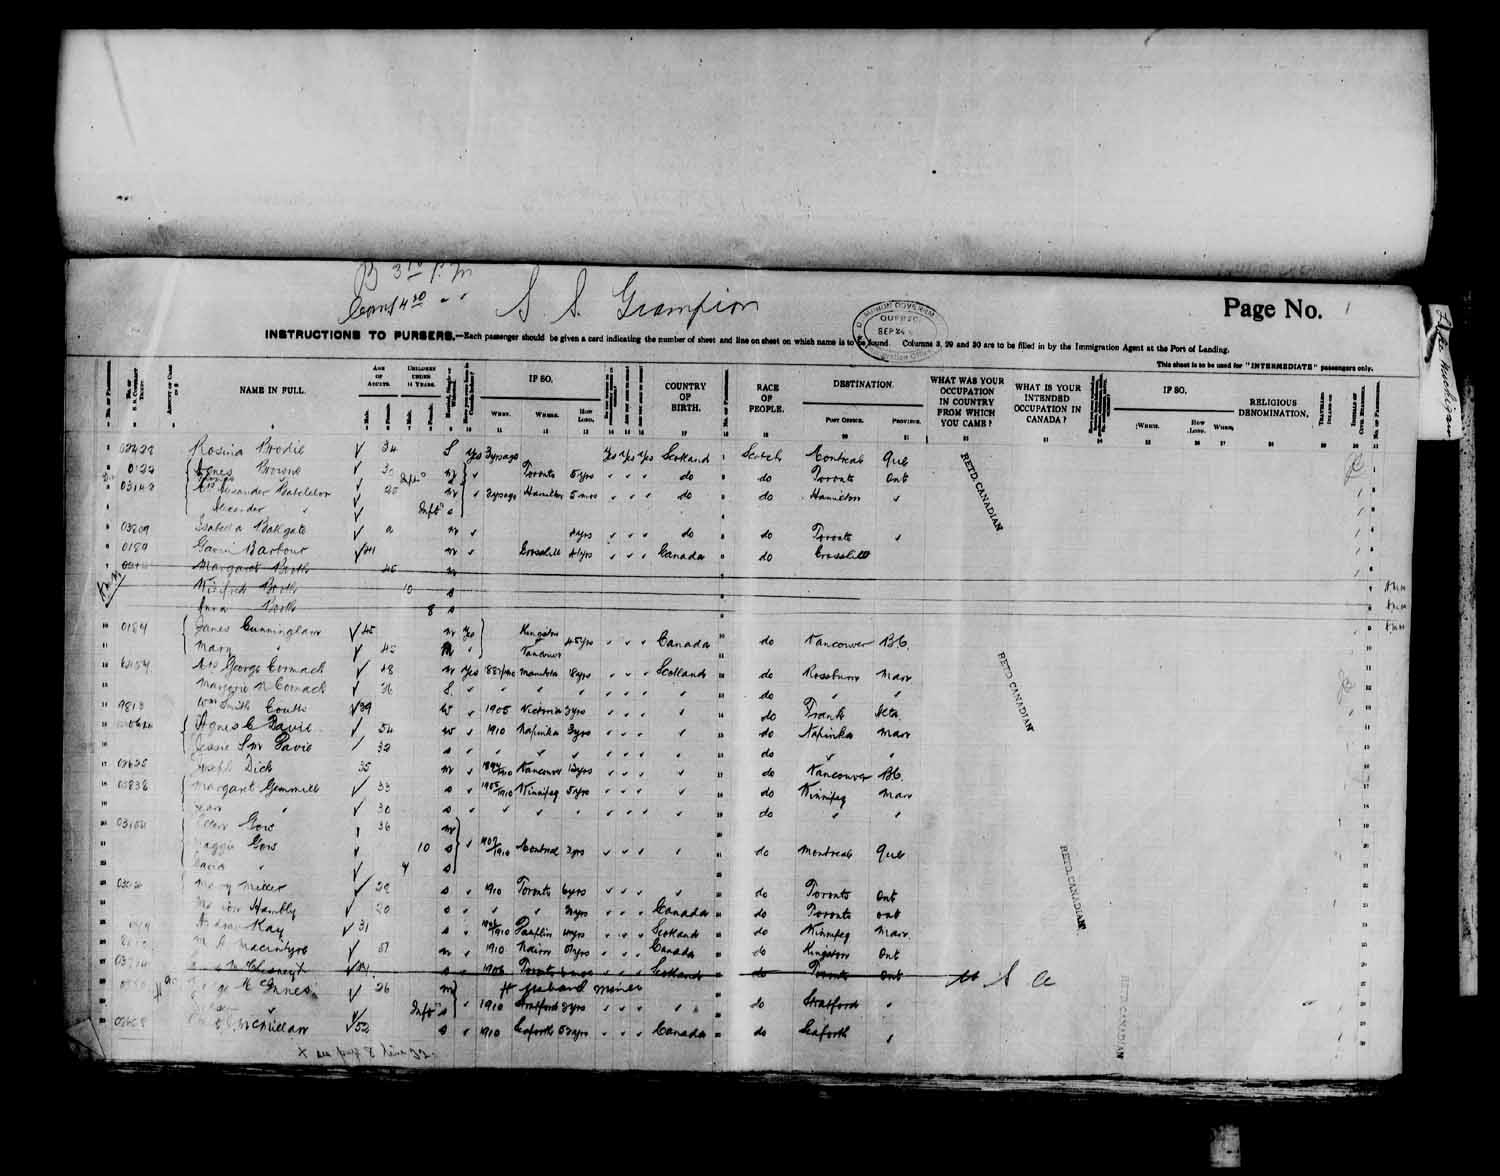 Digitized page of Passenger Lists for Image No.: e003566512